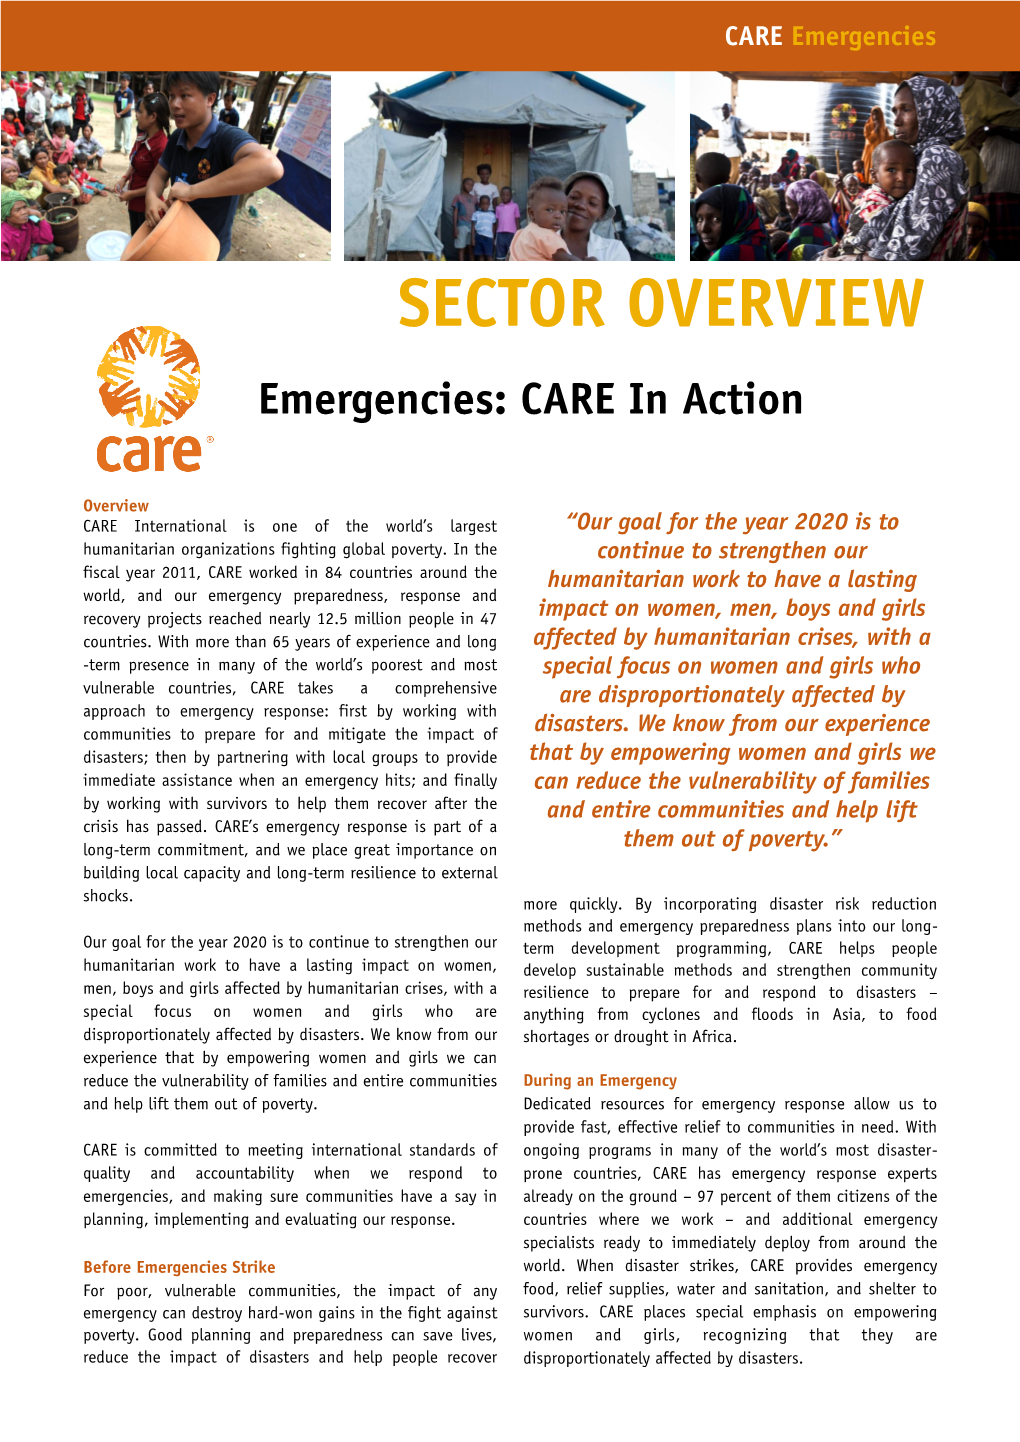 SECTOR OVERVIEW Emergencies: CARE in Action